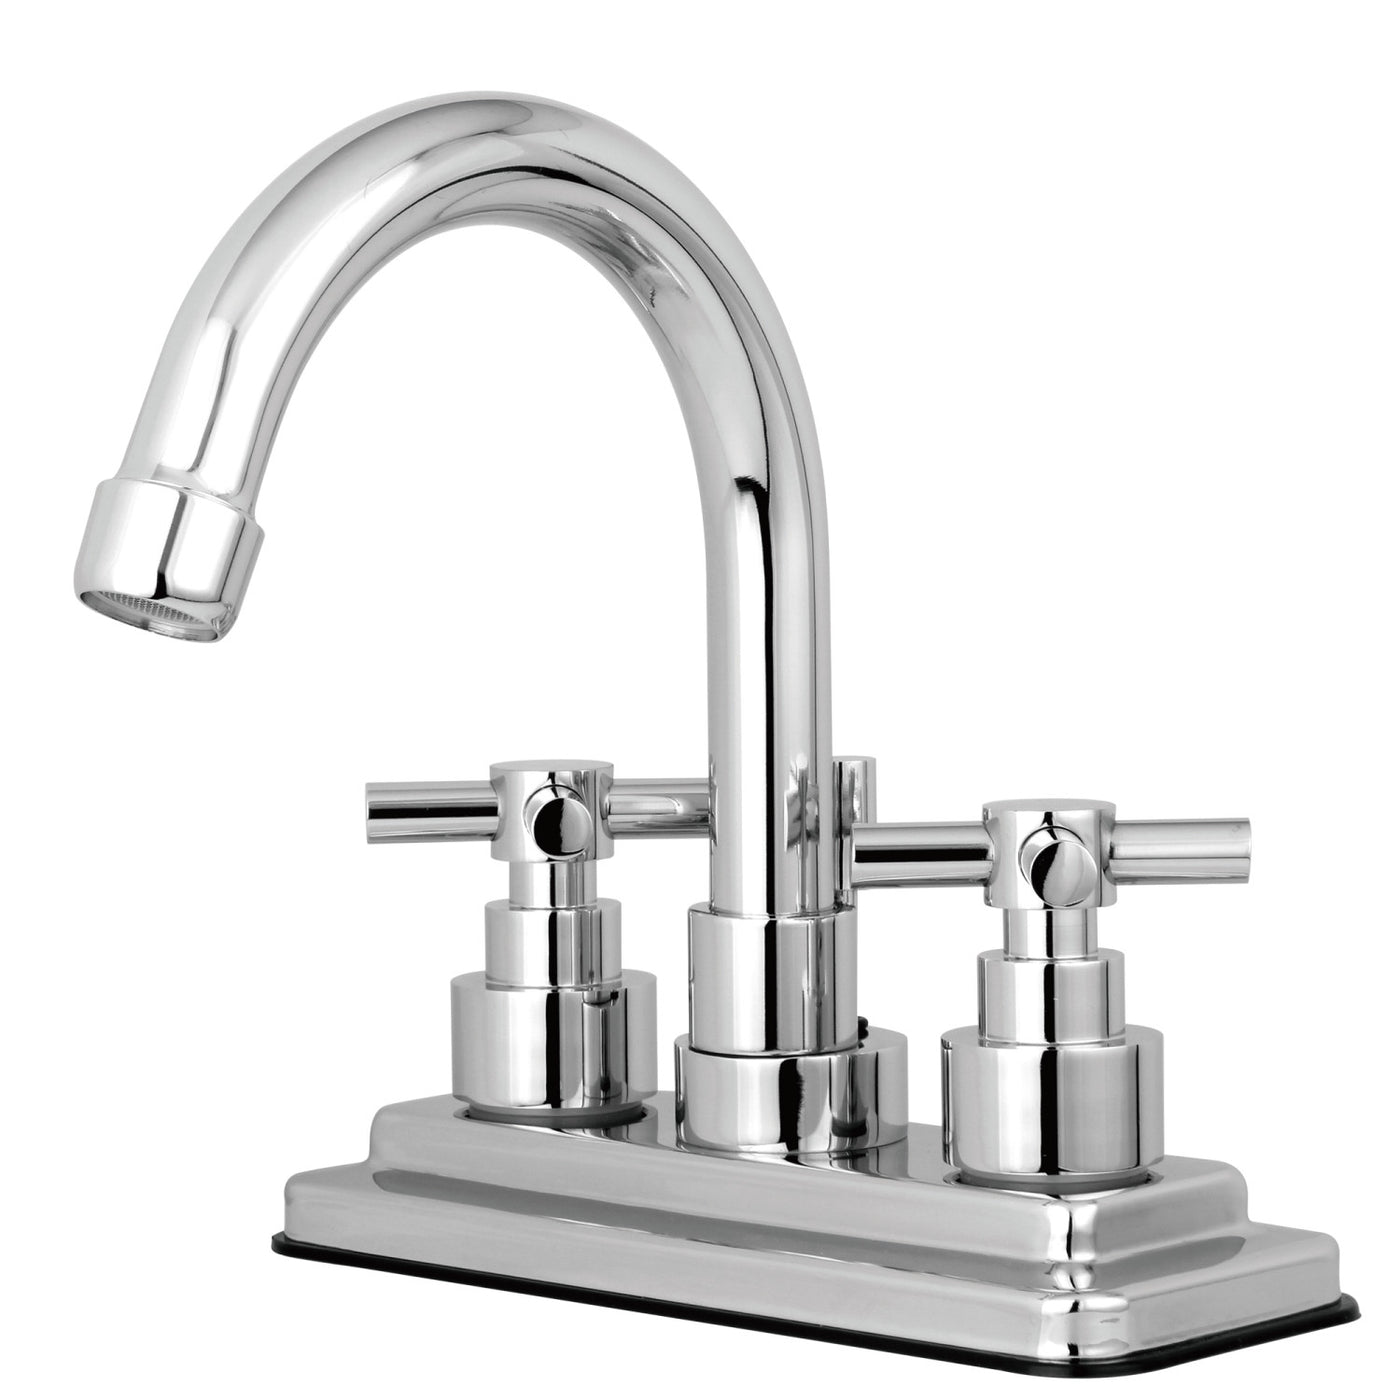 Elements of Design ES8661EX 4-Inch Centerset Bathroom Faucet with Brass Pop-Up, Polished Chrome